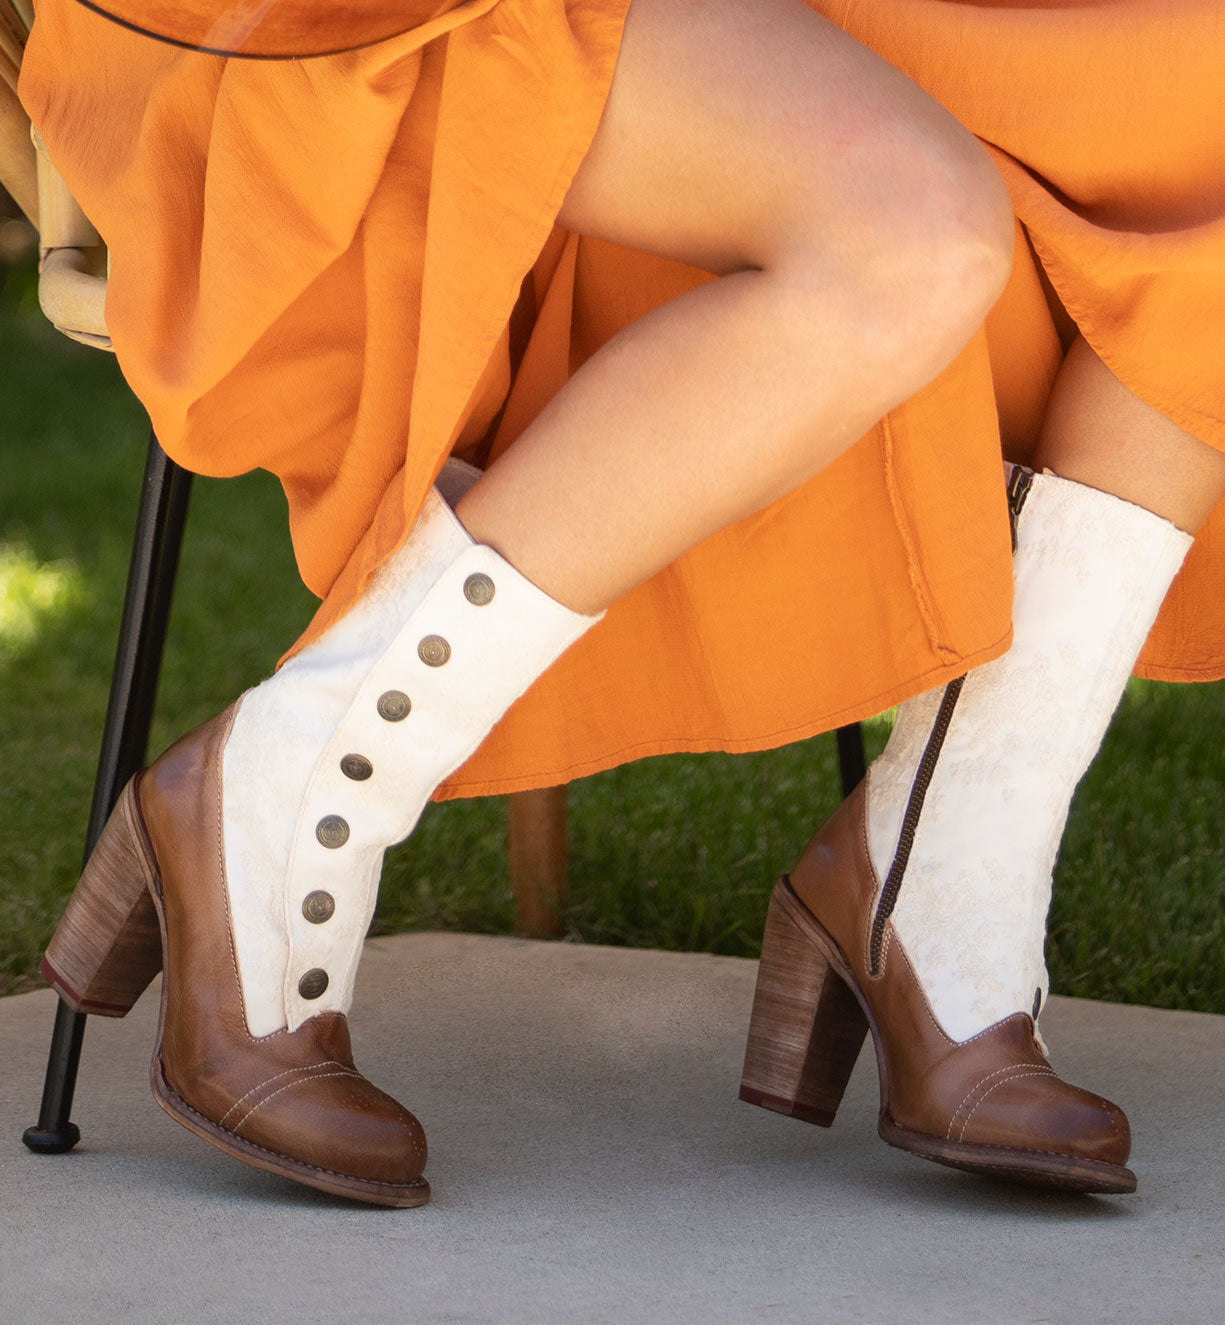 A woman in an orange dress is sitting on a bench wearing white and tan Amelia boots made by Oak Tree Farms, which are made of full grain leather.